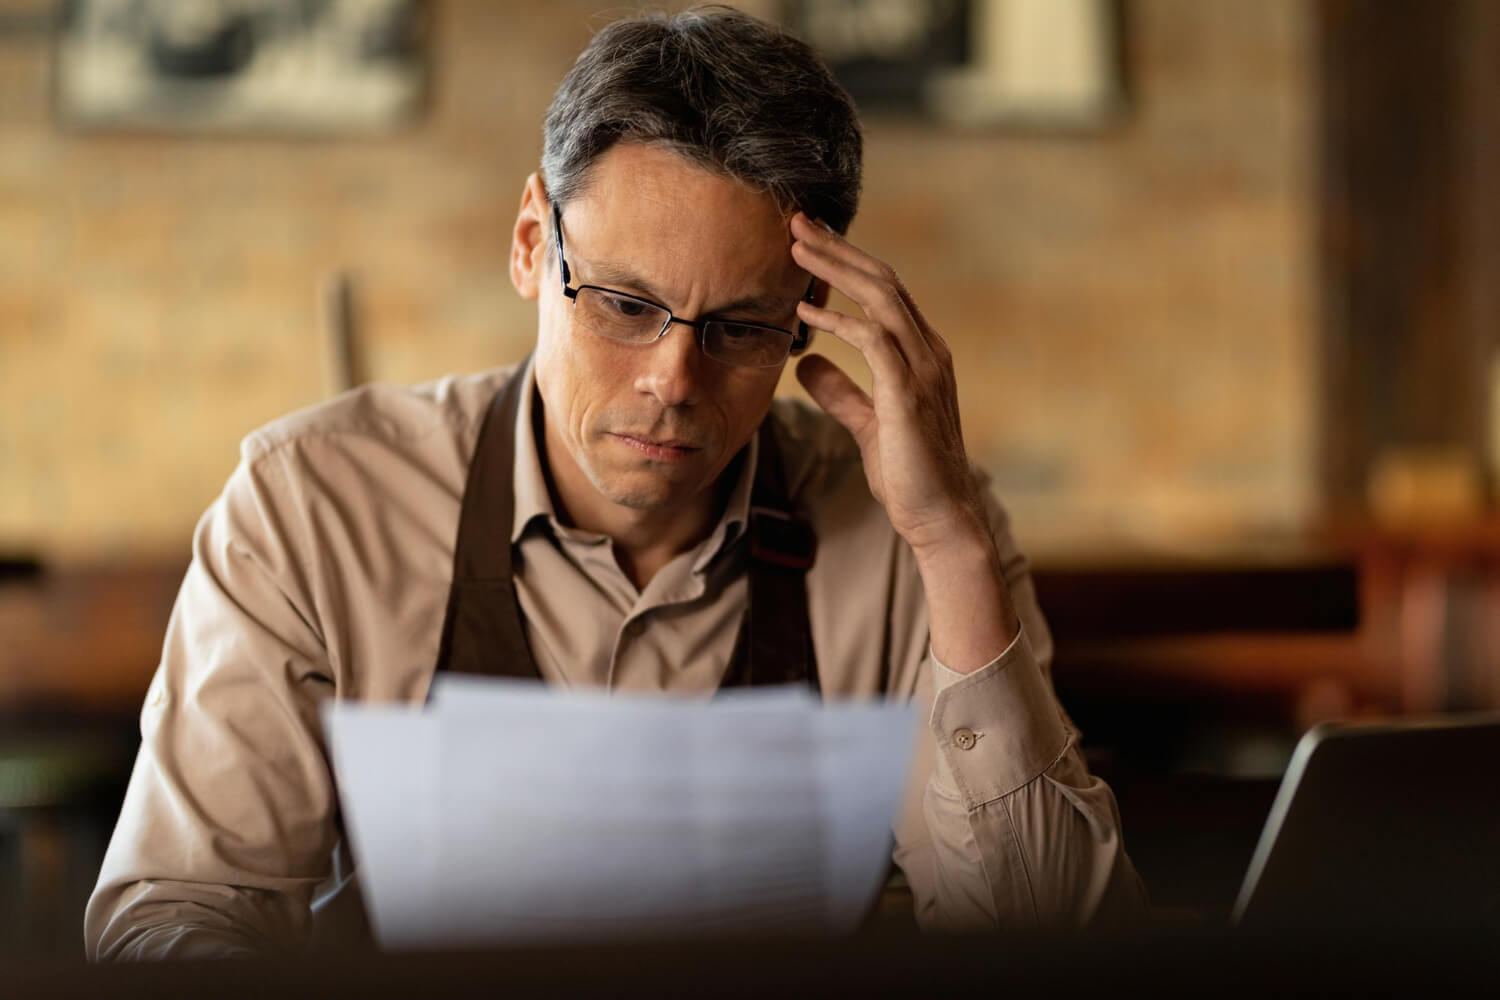 distraught-small-business-owner-reading-reports-while-going-through-paperwork